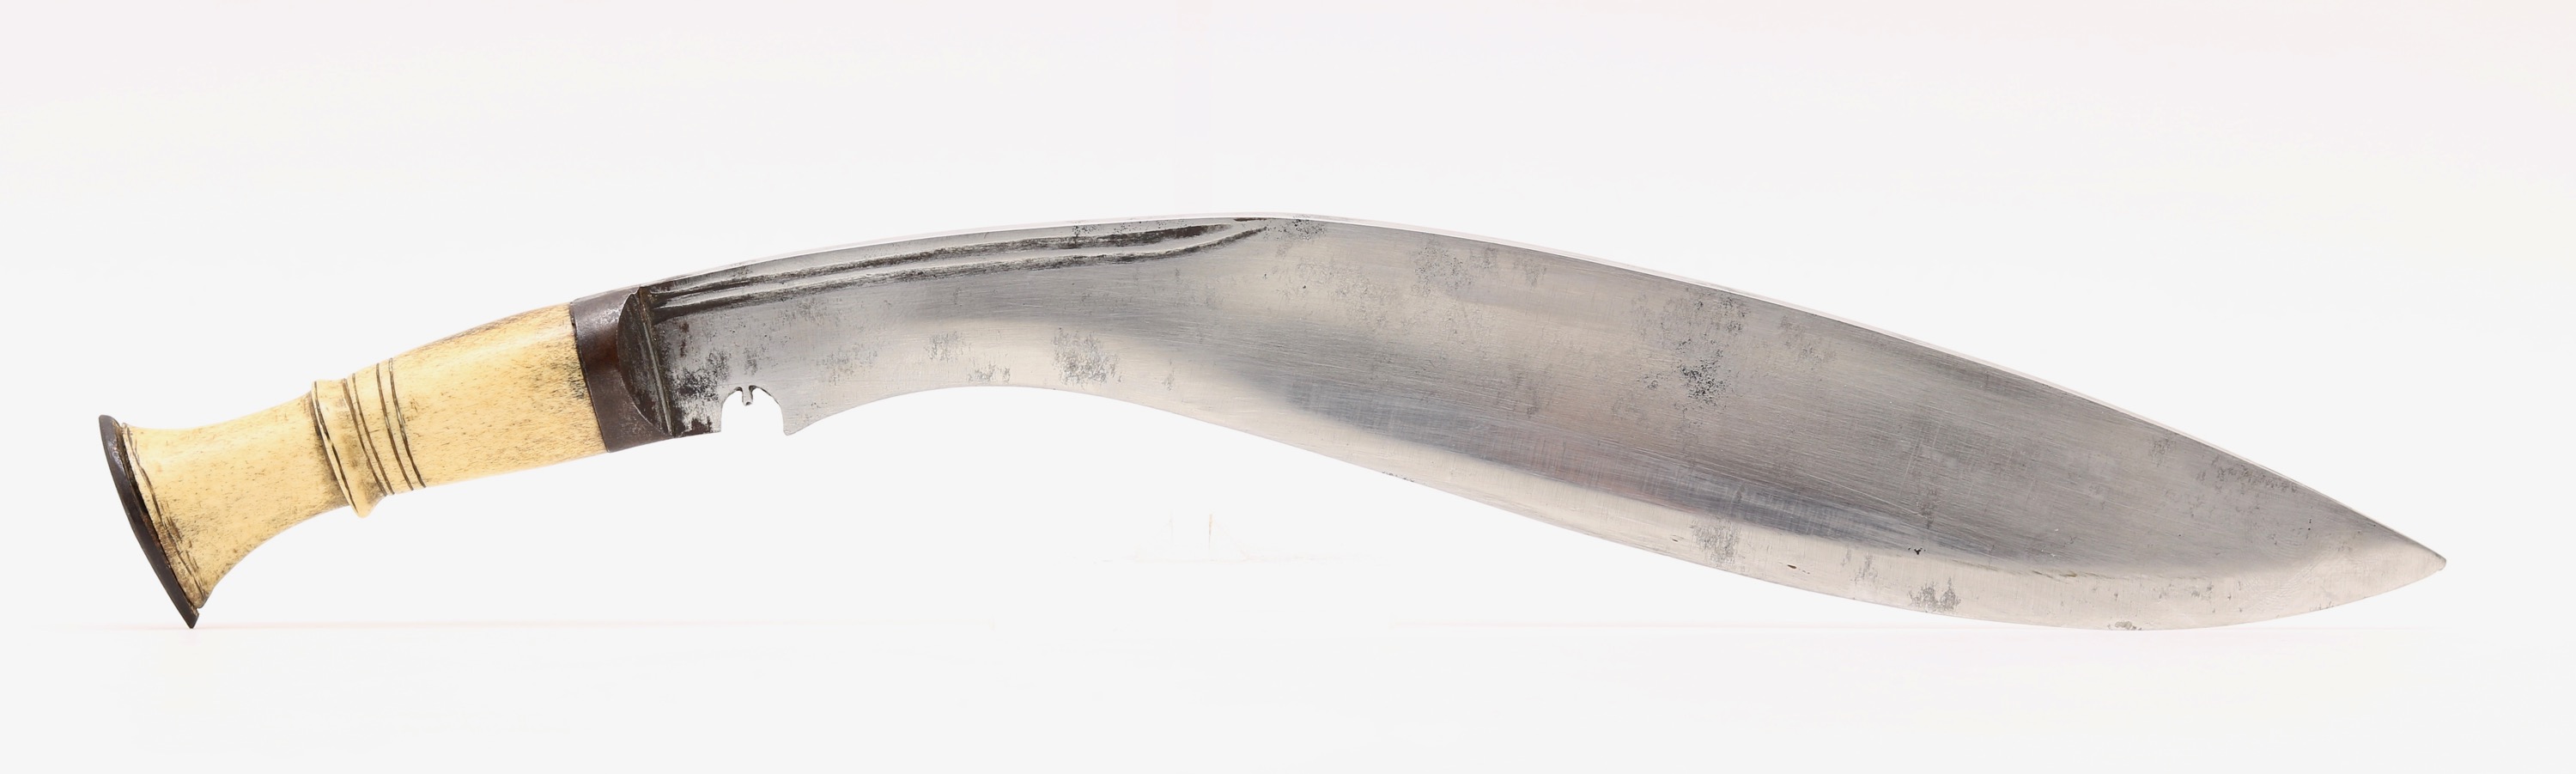 A khukuri without grooves